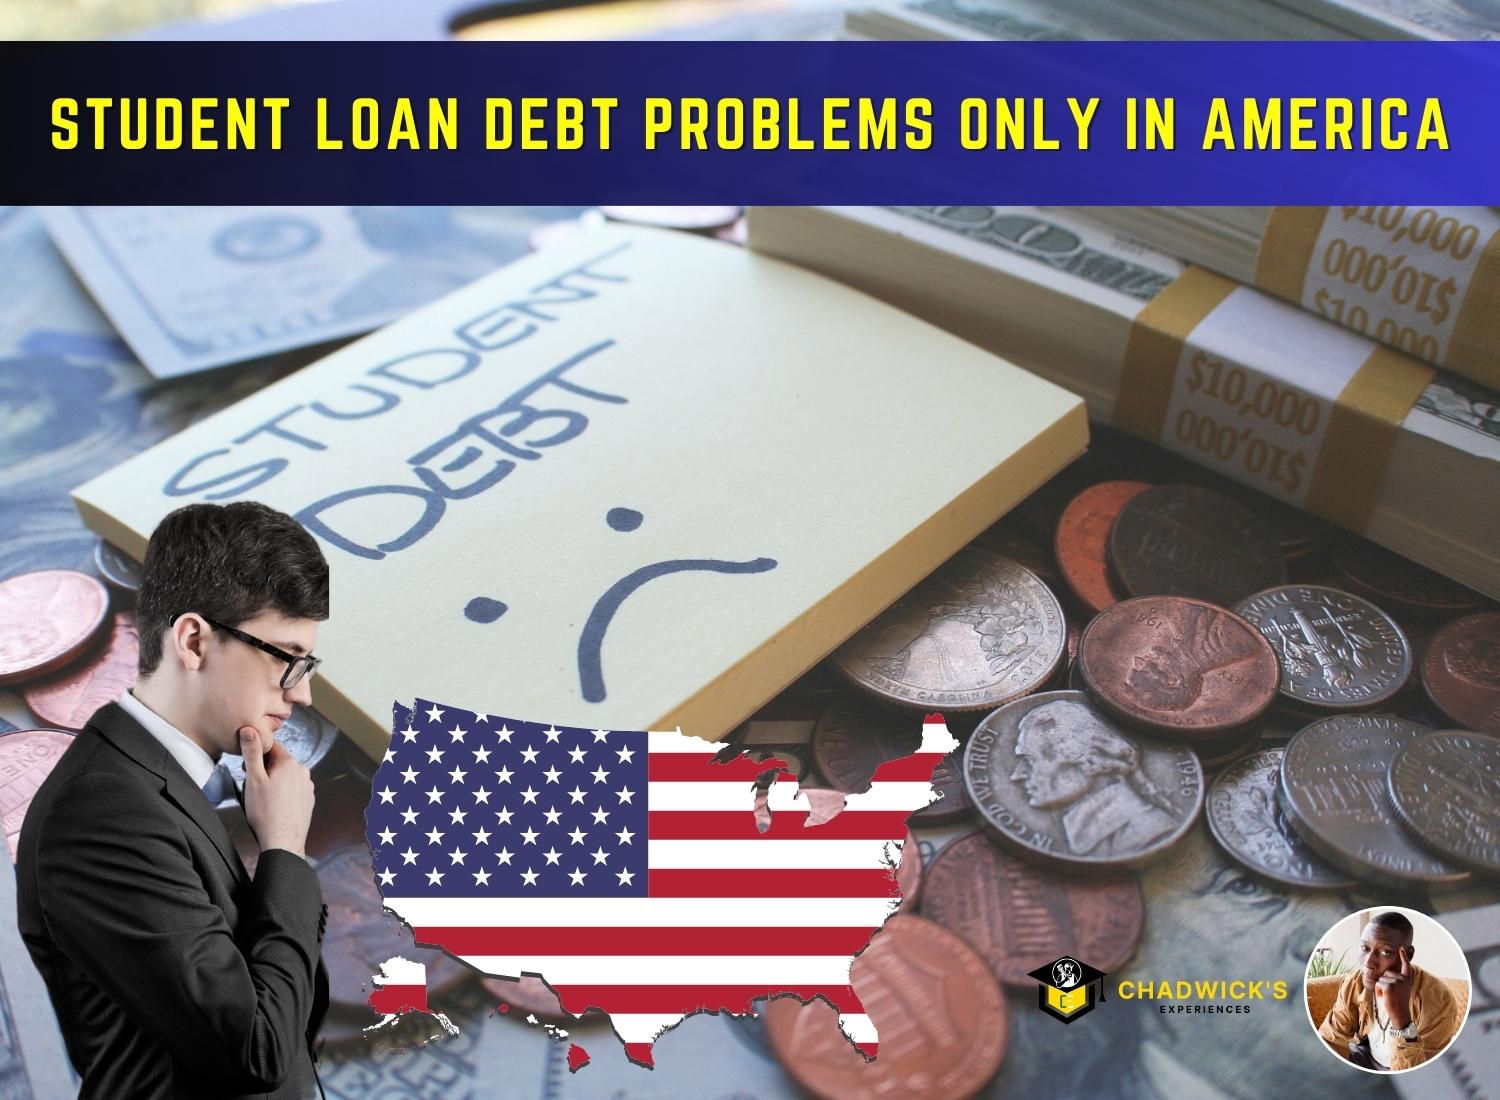 Student Loan Debt Problems Only in America